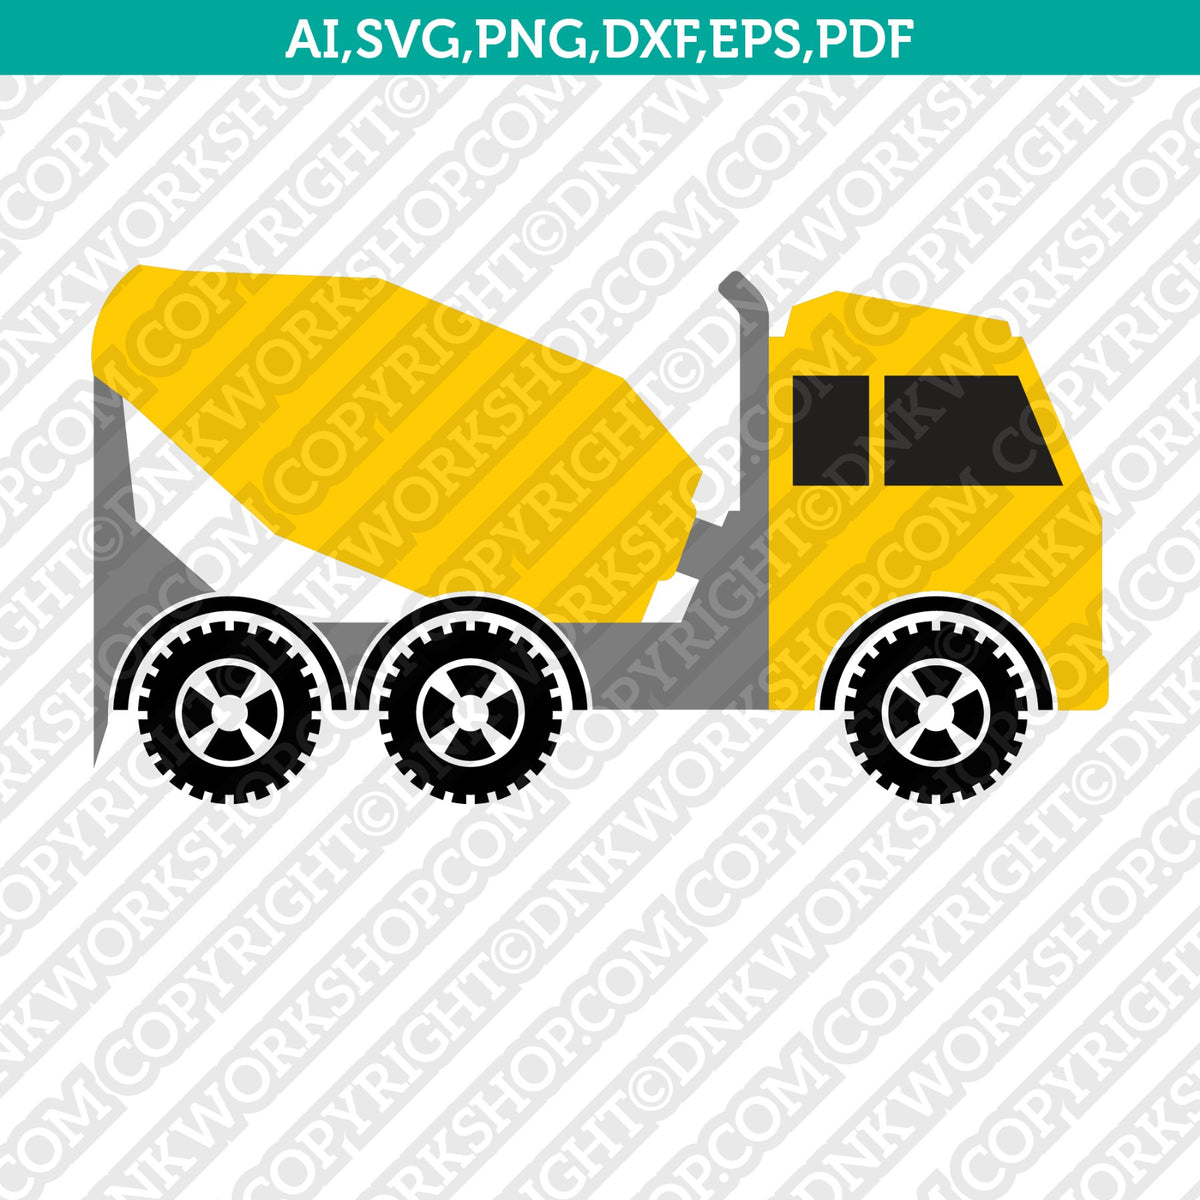 corel clipart vehicles with 3rd